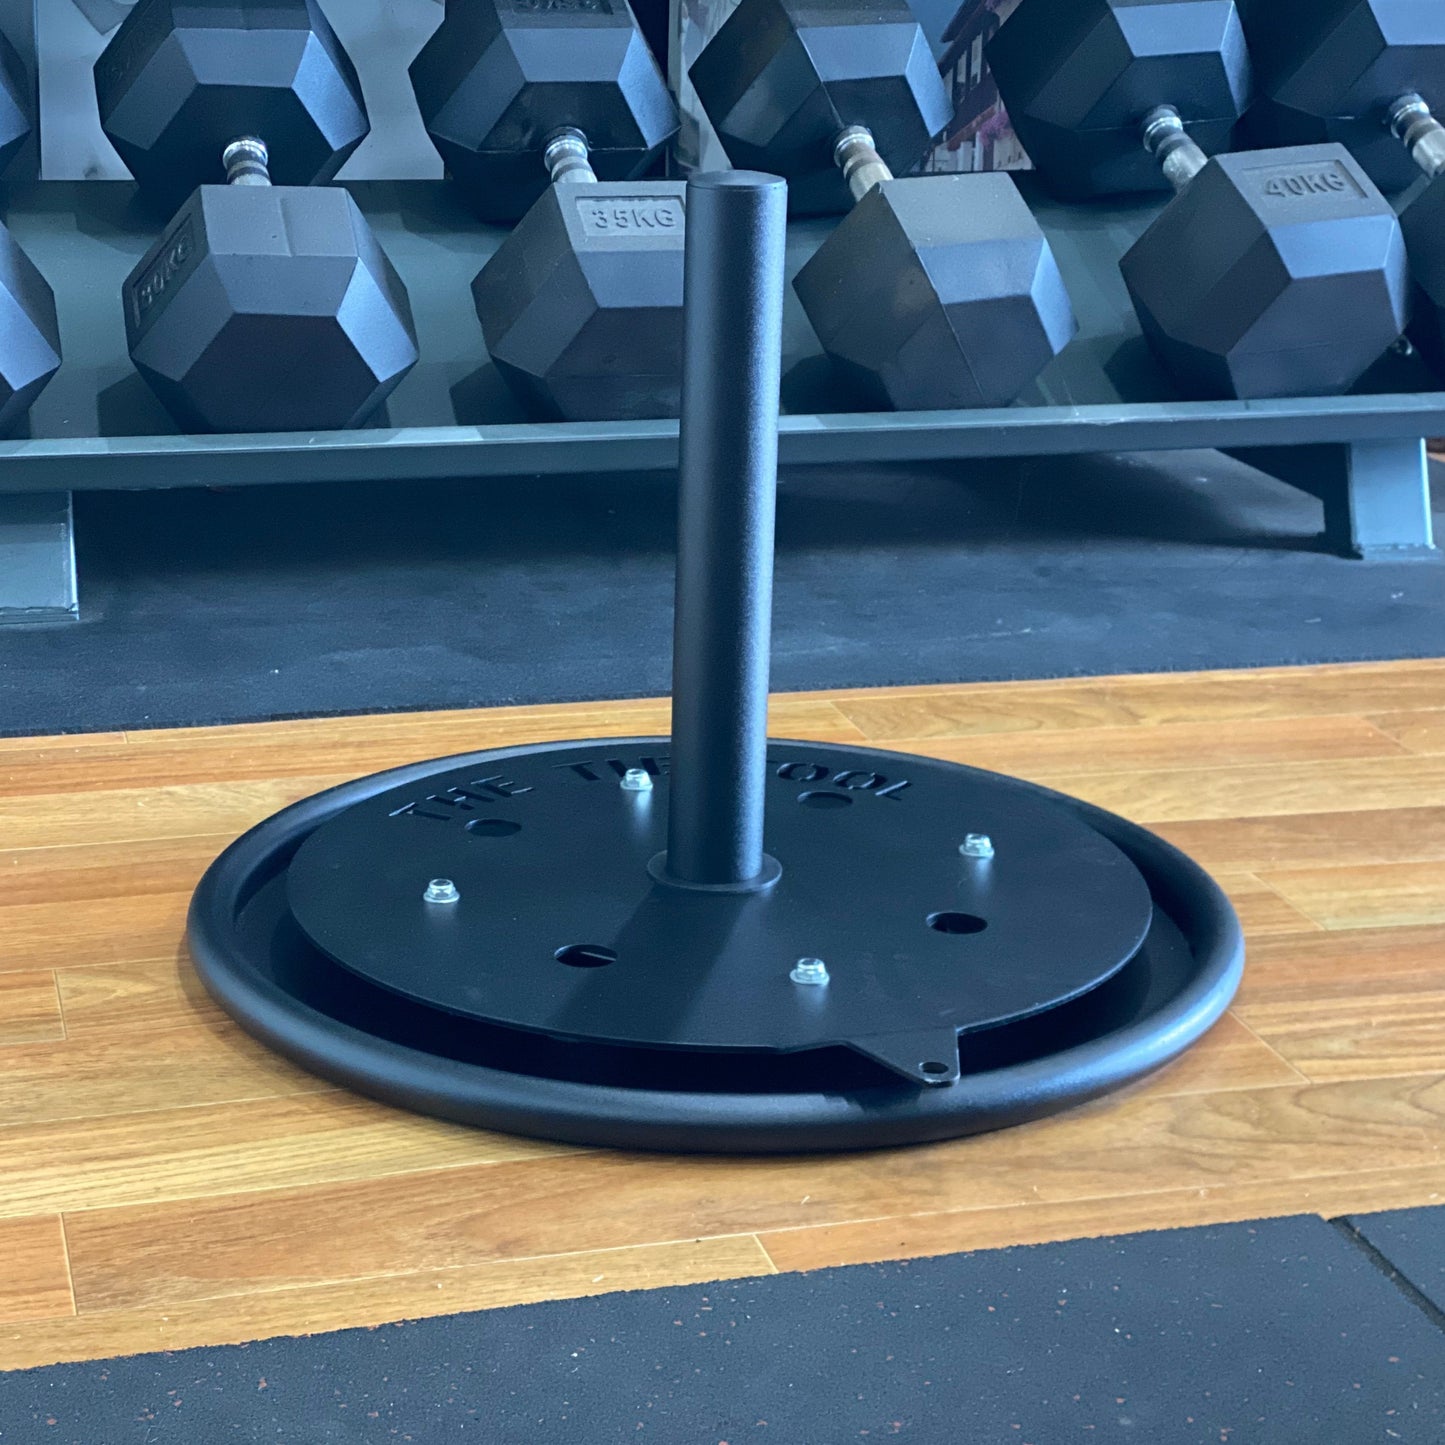 The 360 Pull Sled™